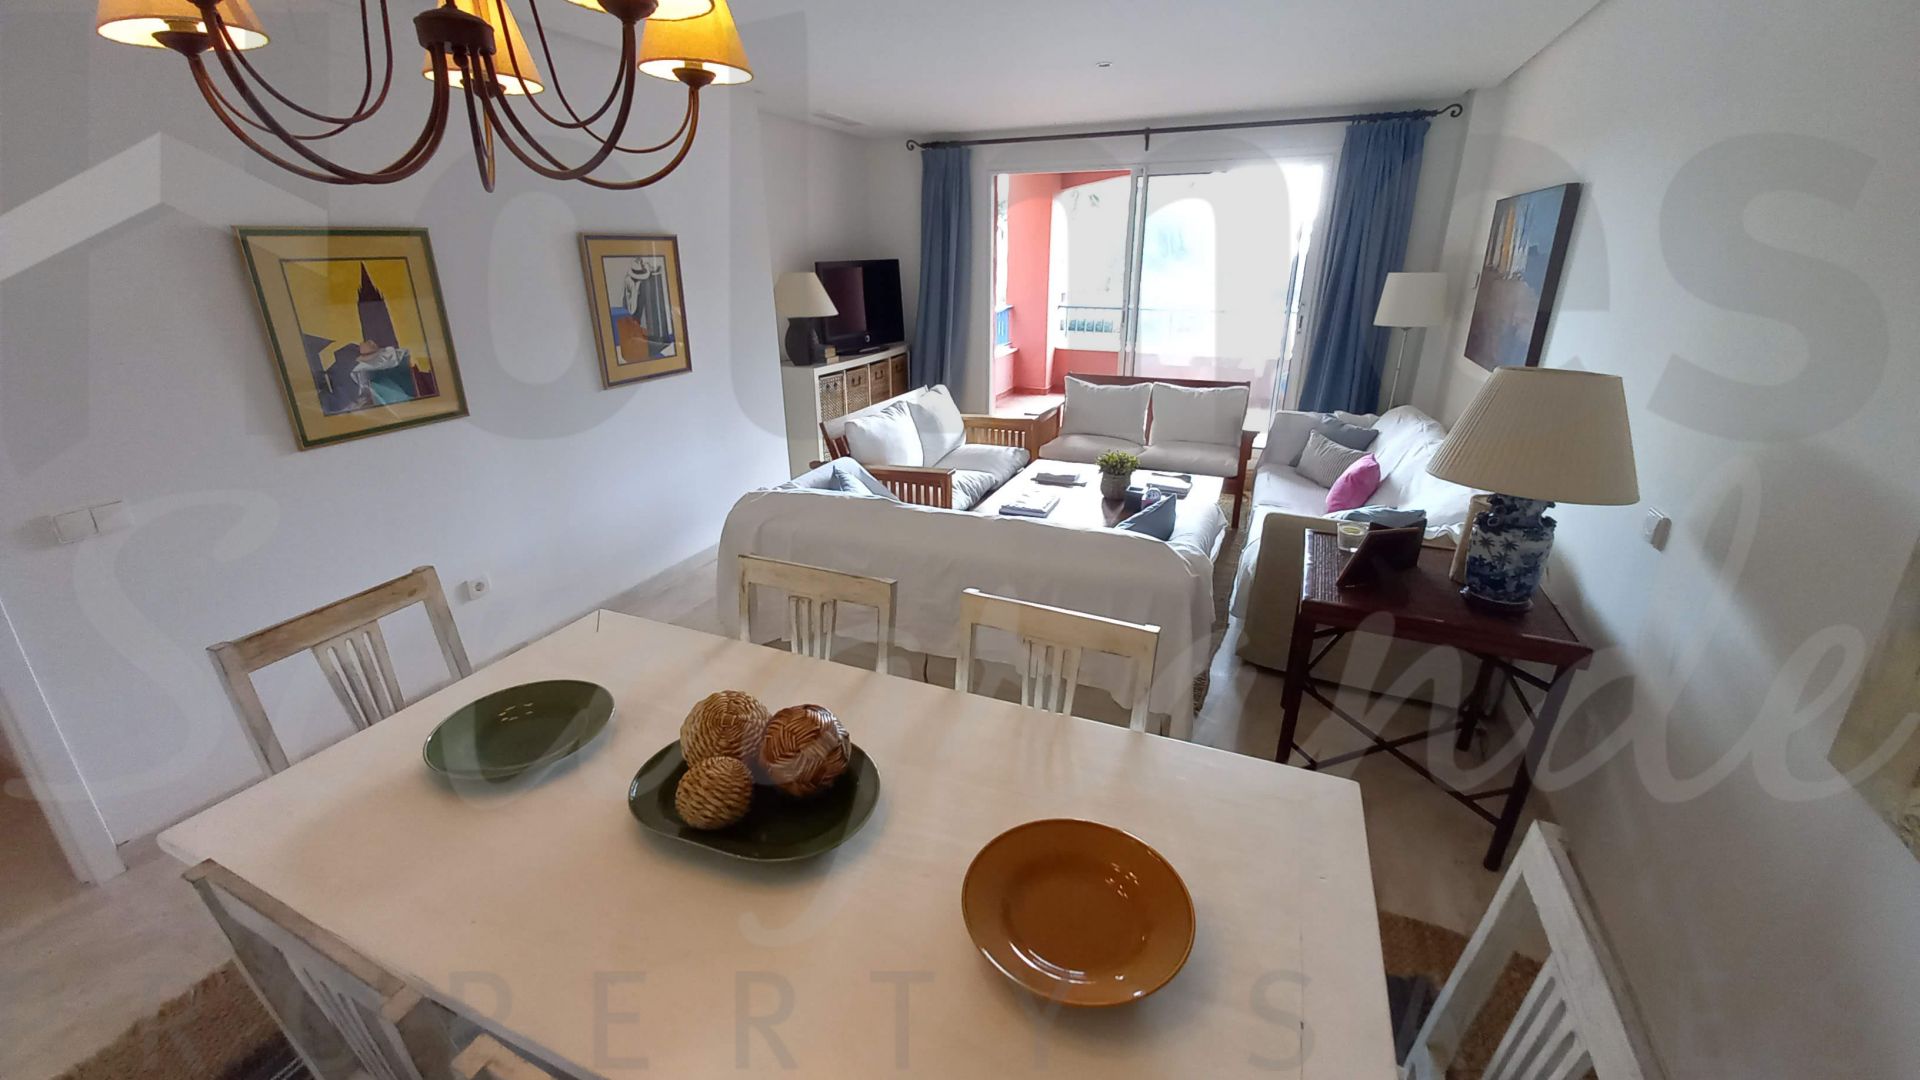 South-east facing second floor 3 bedroom apartment in Guadalmarina with ...